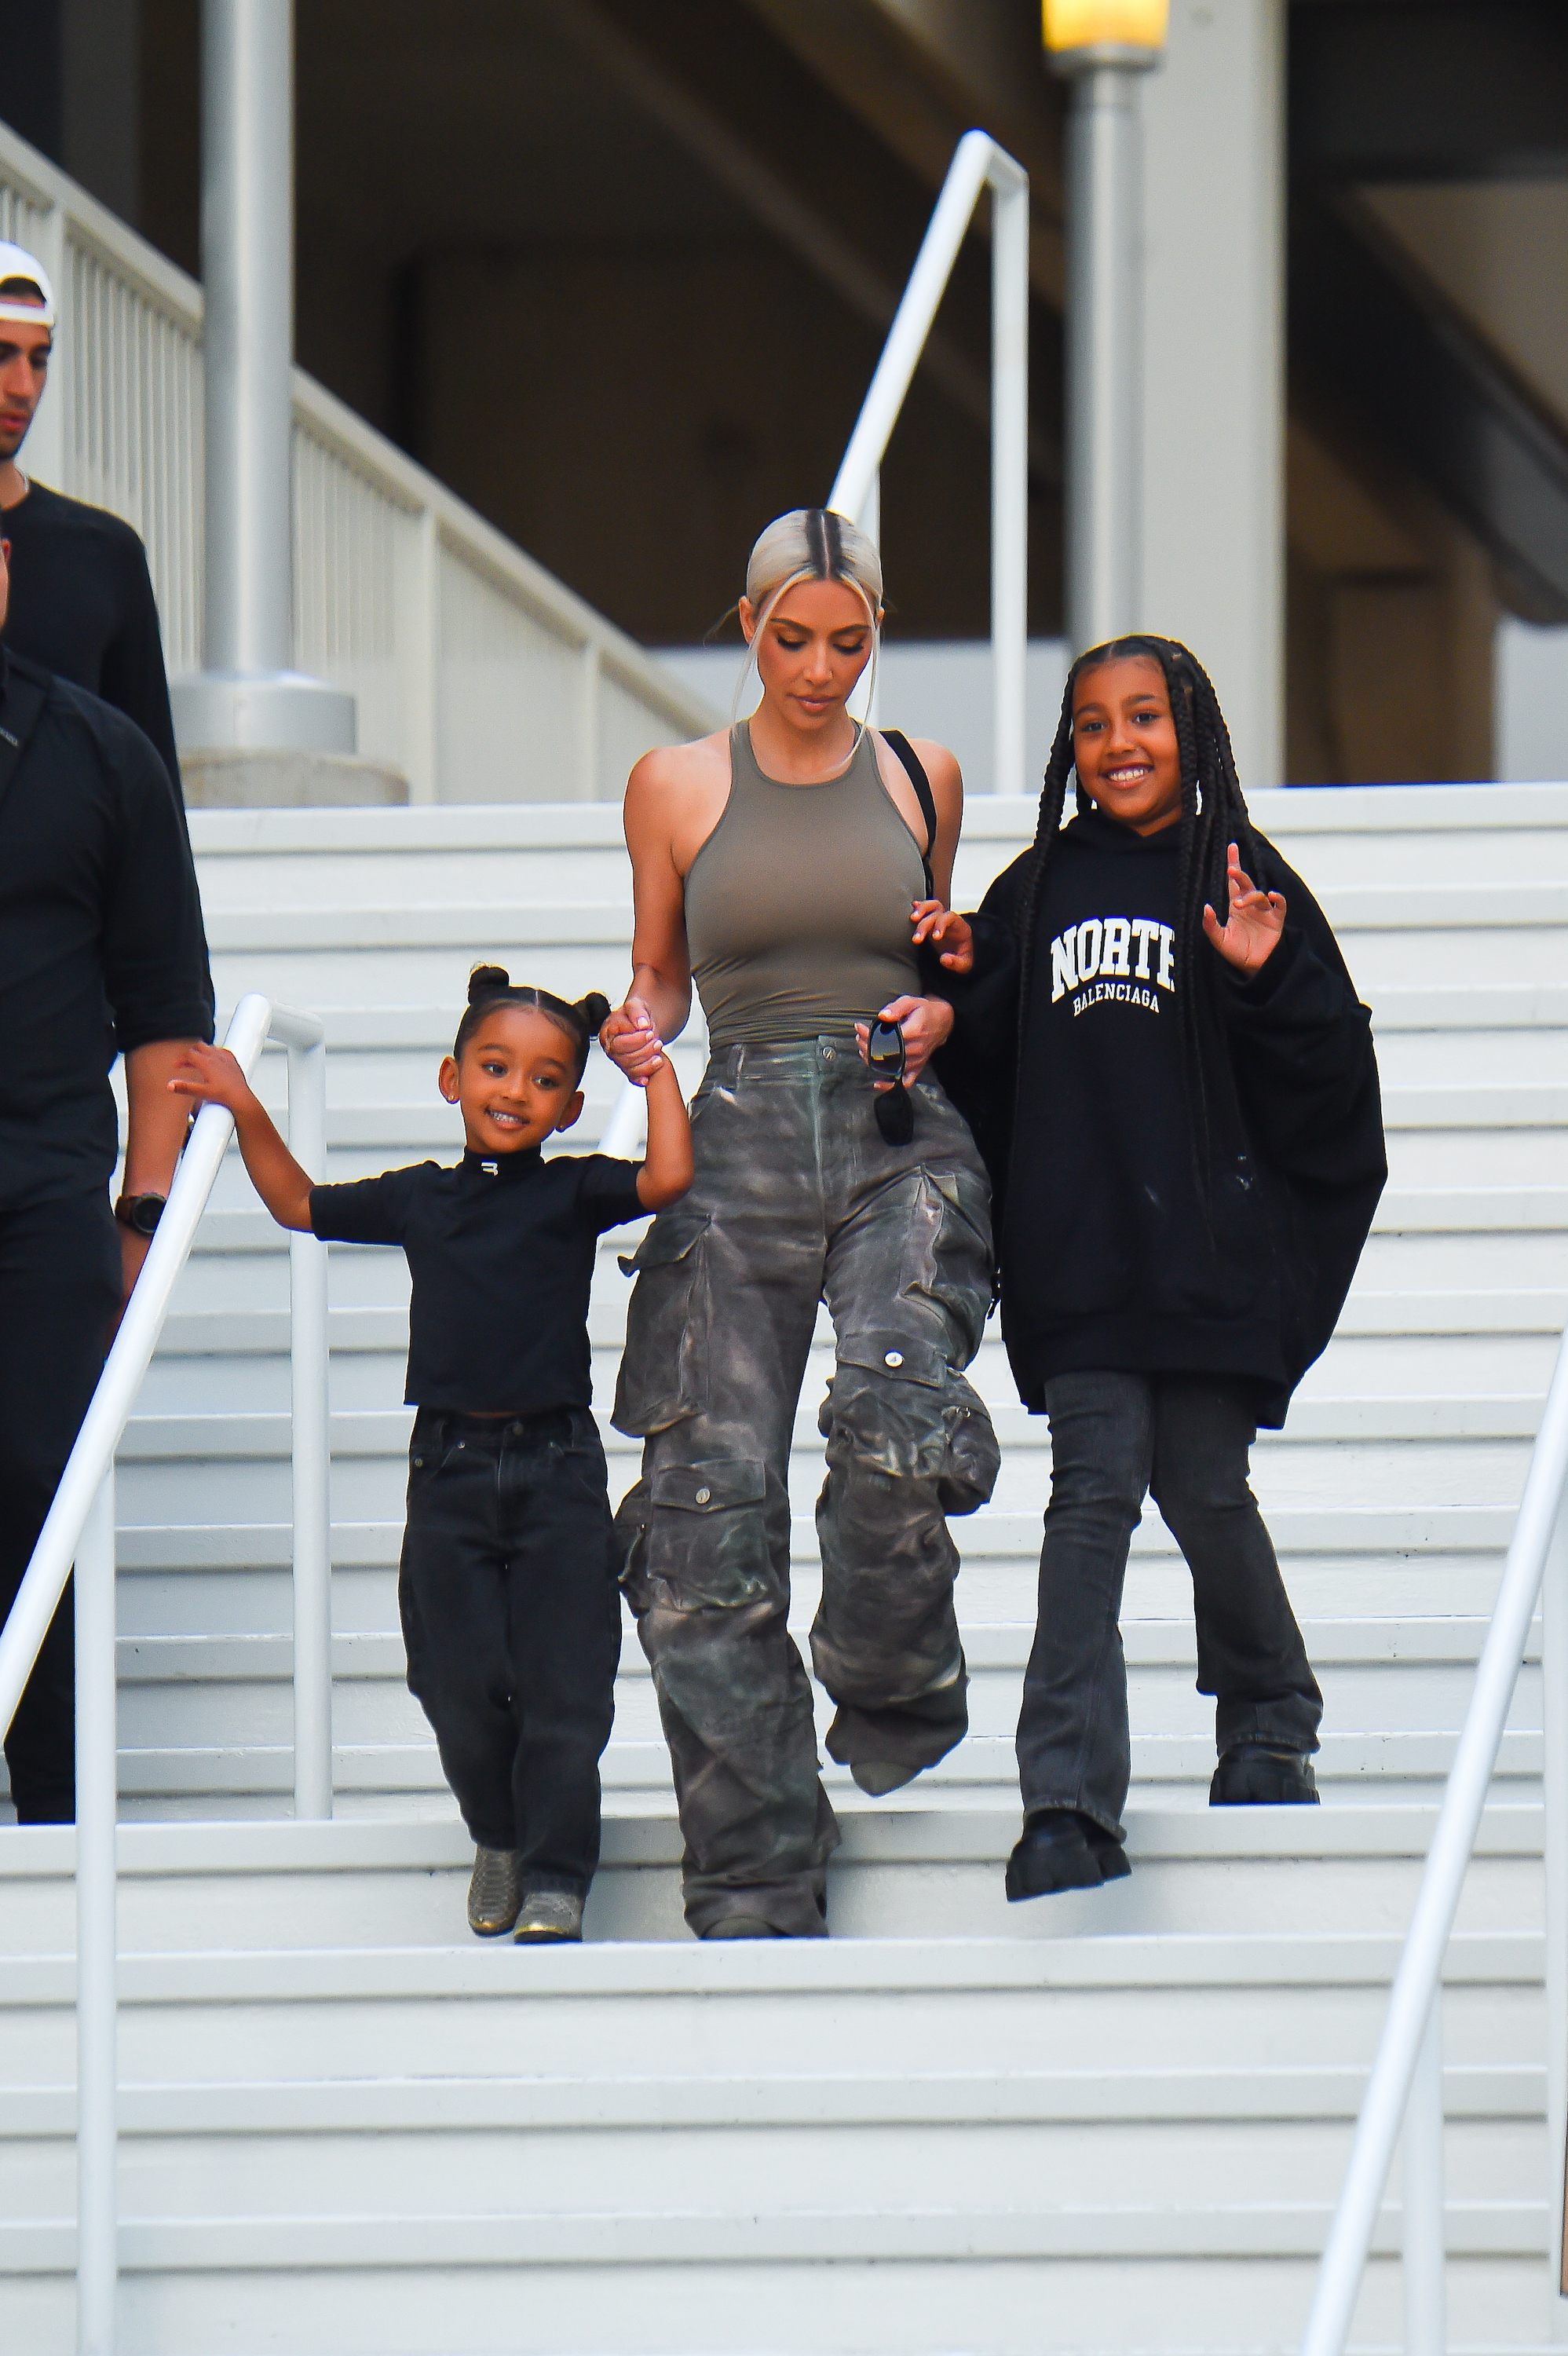 Just this month, North took the stage with some of her siblings and friends